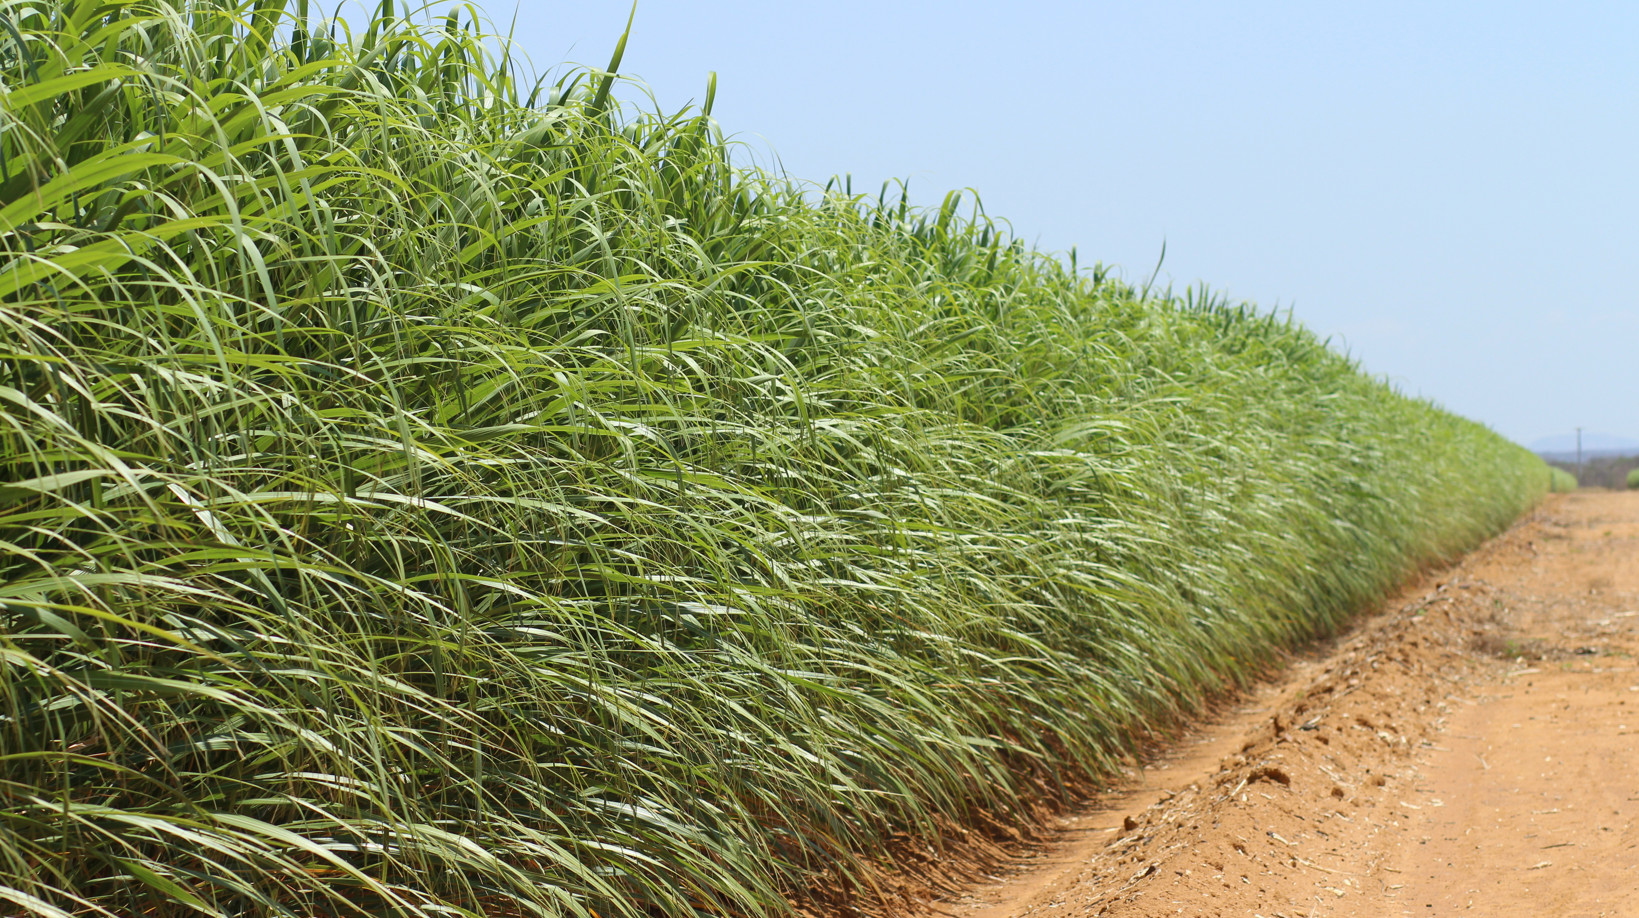 Drip irrigation allows mapping of increased productivity in sugarcane fields